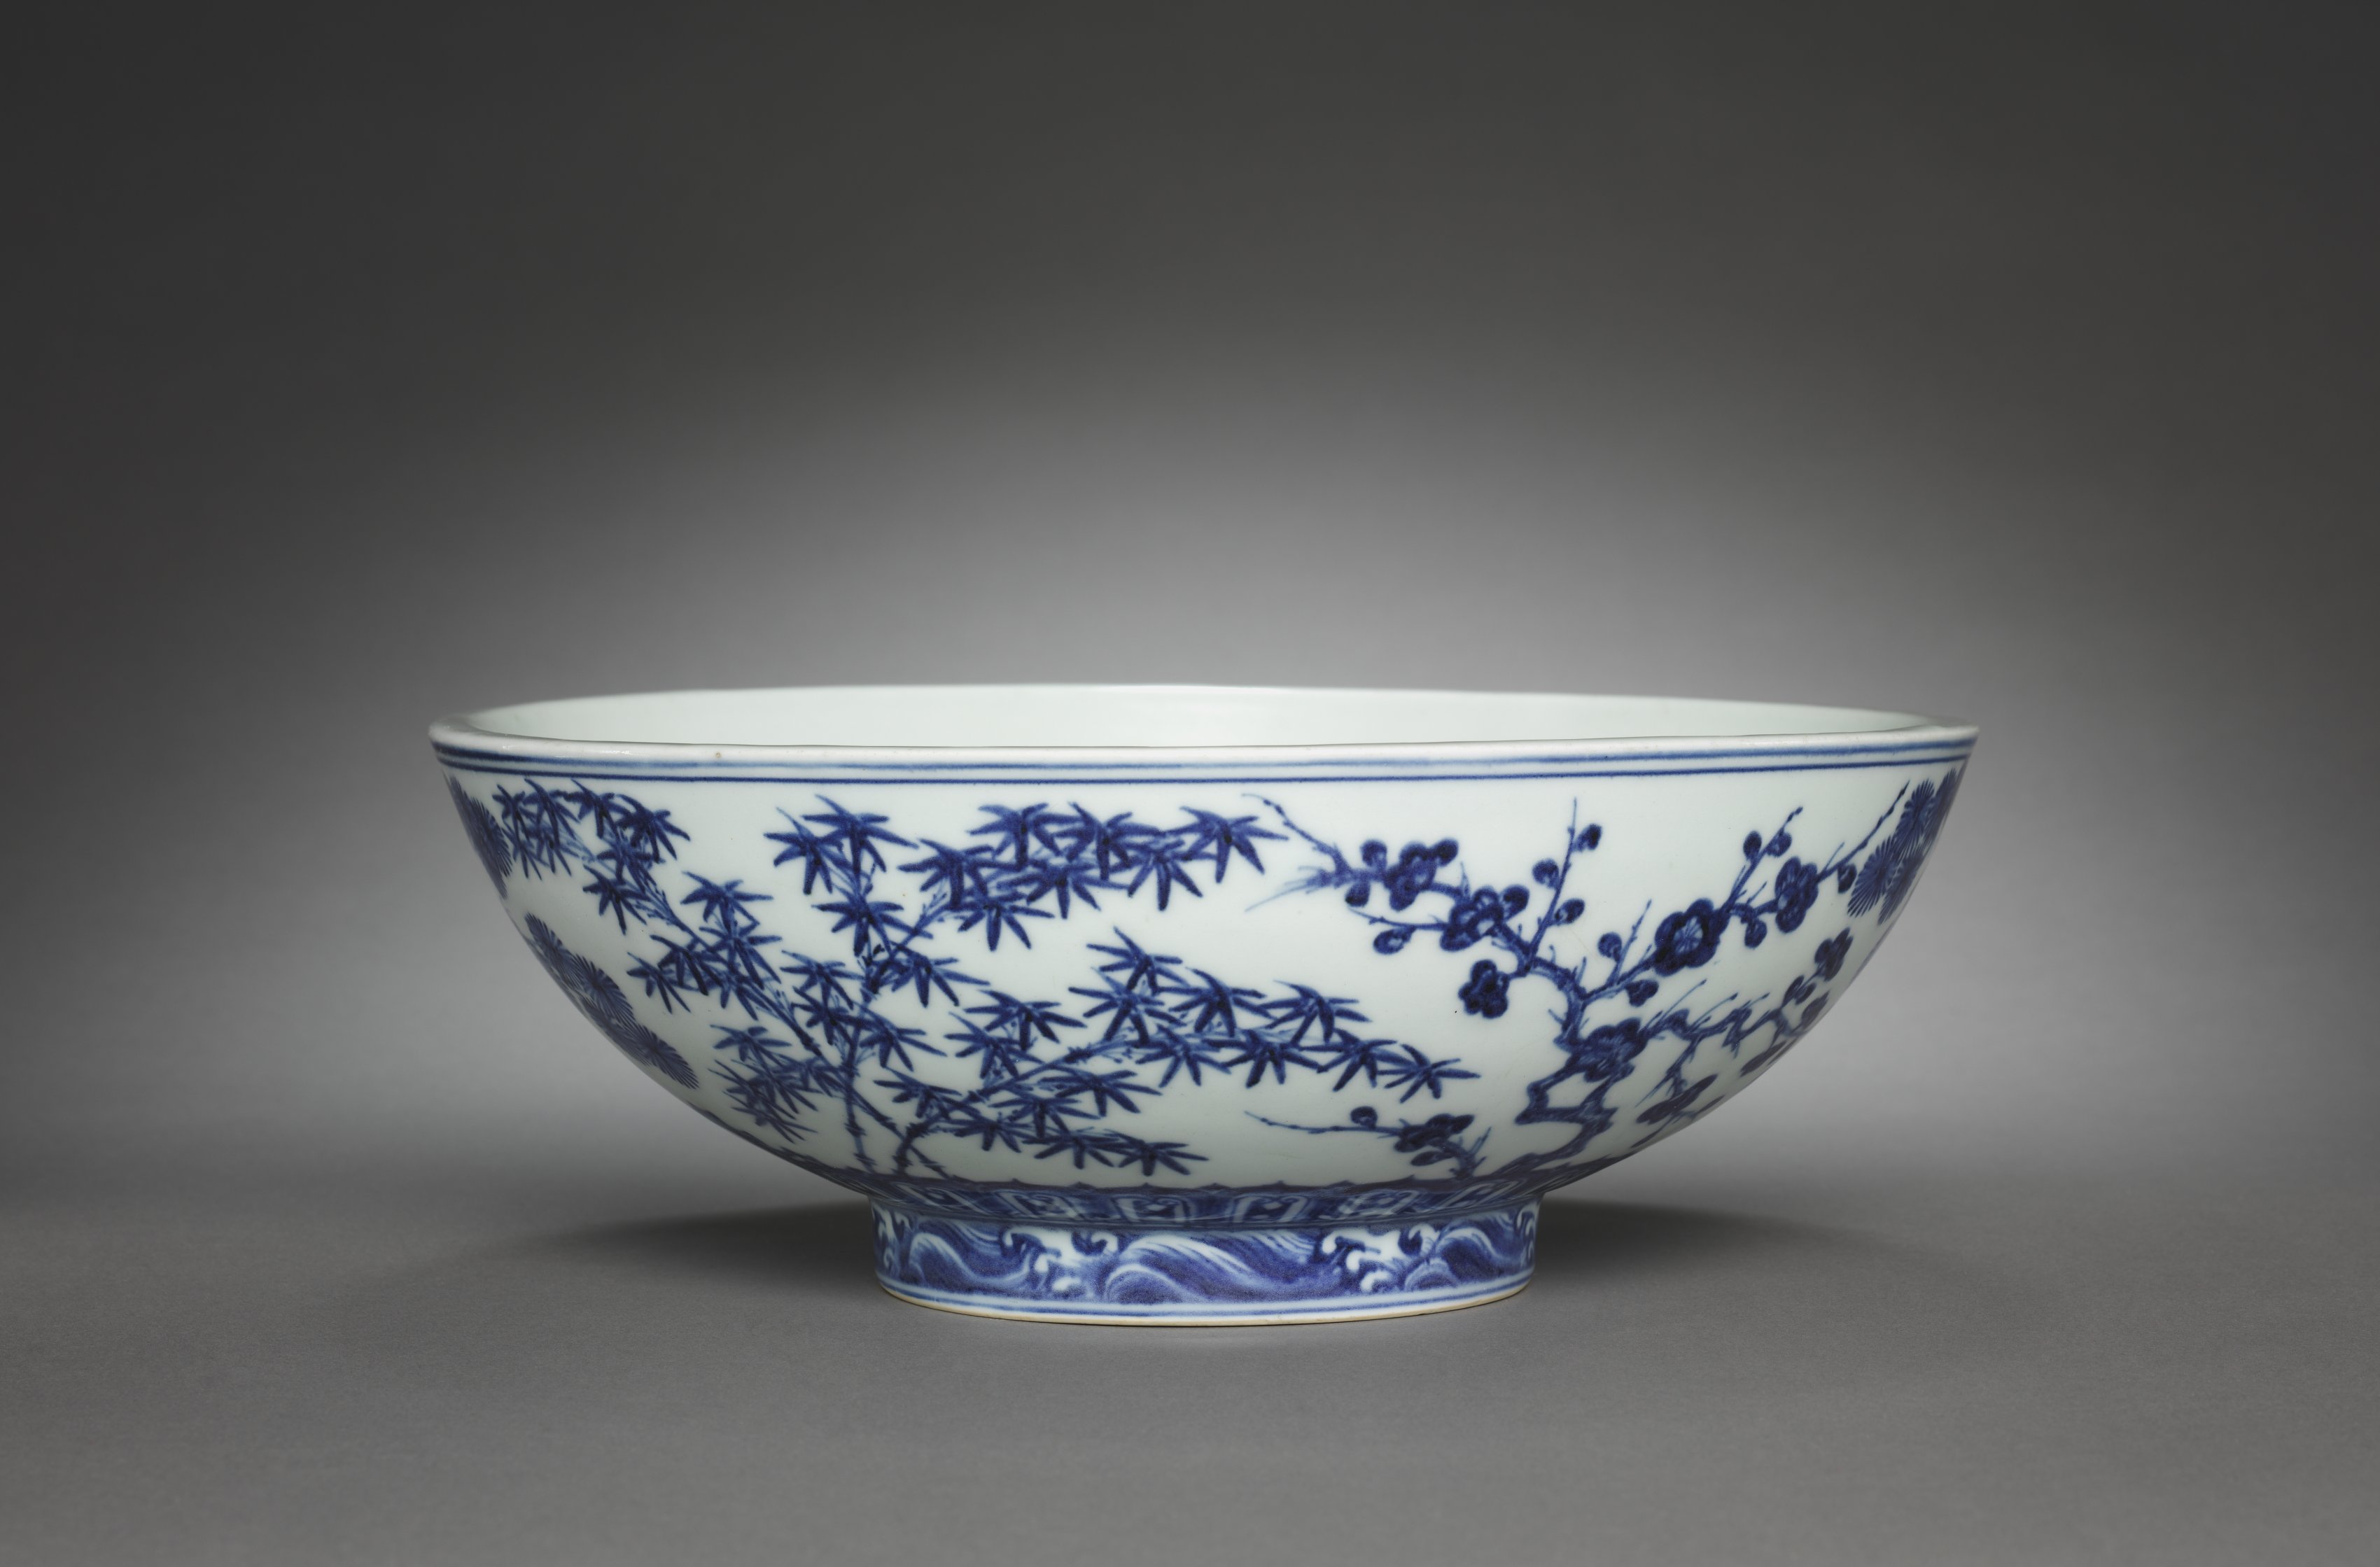 Bowl with Decoration of the "Three Friends"